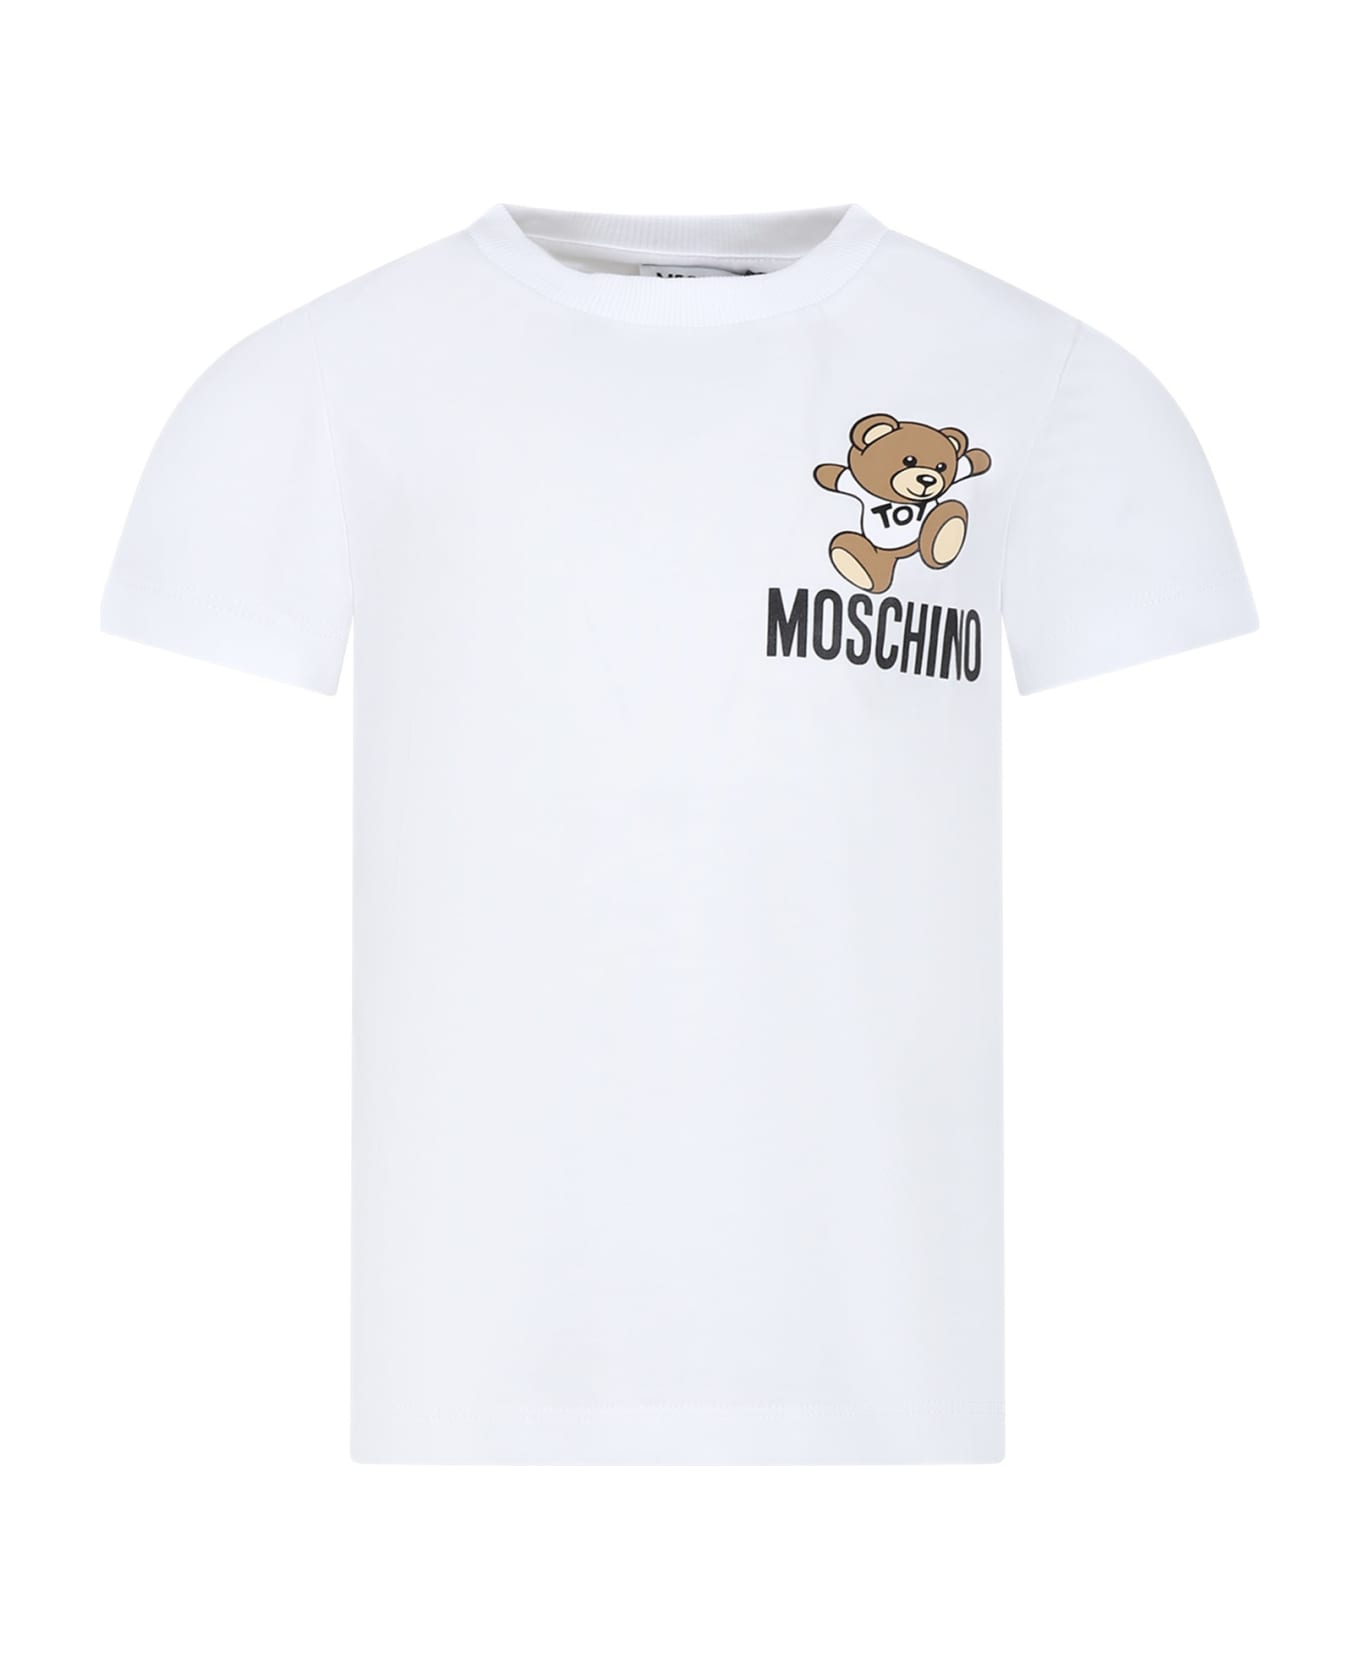 Moschino White T-shirt For Kids With Teddy Bear And Logo - WHITE Tシャツ＆ポロシャツ